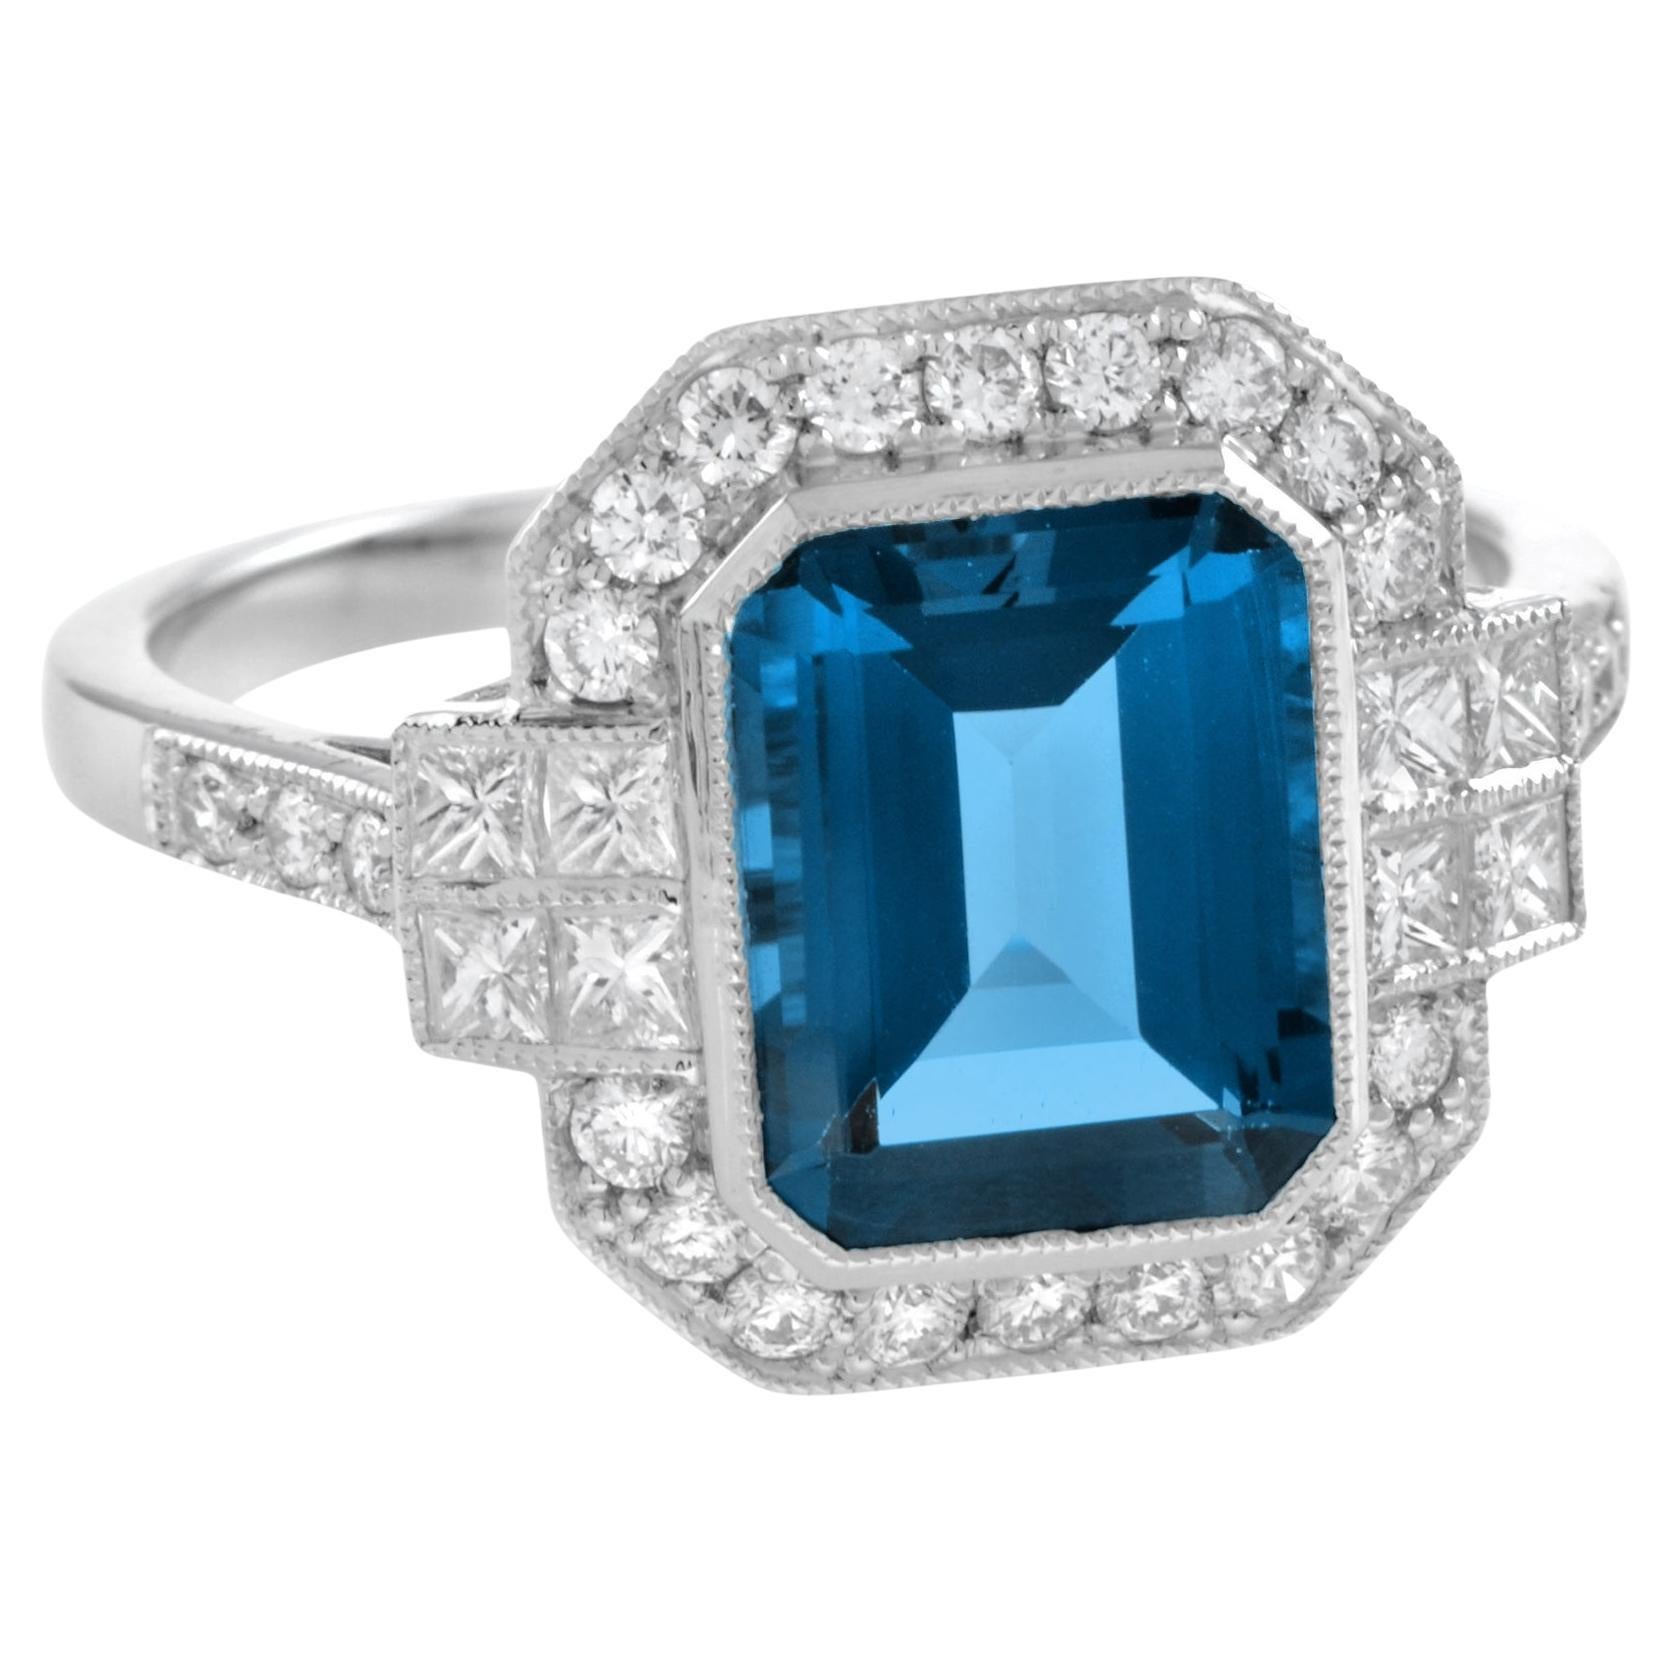 For Sale:  Emerald Cut London Blue Topaz with Diamond Engagement Ring in Platinum